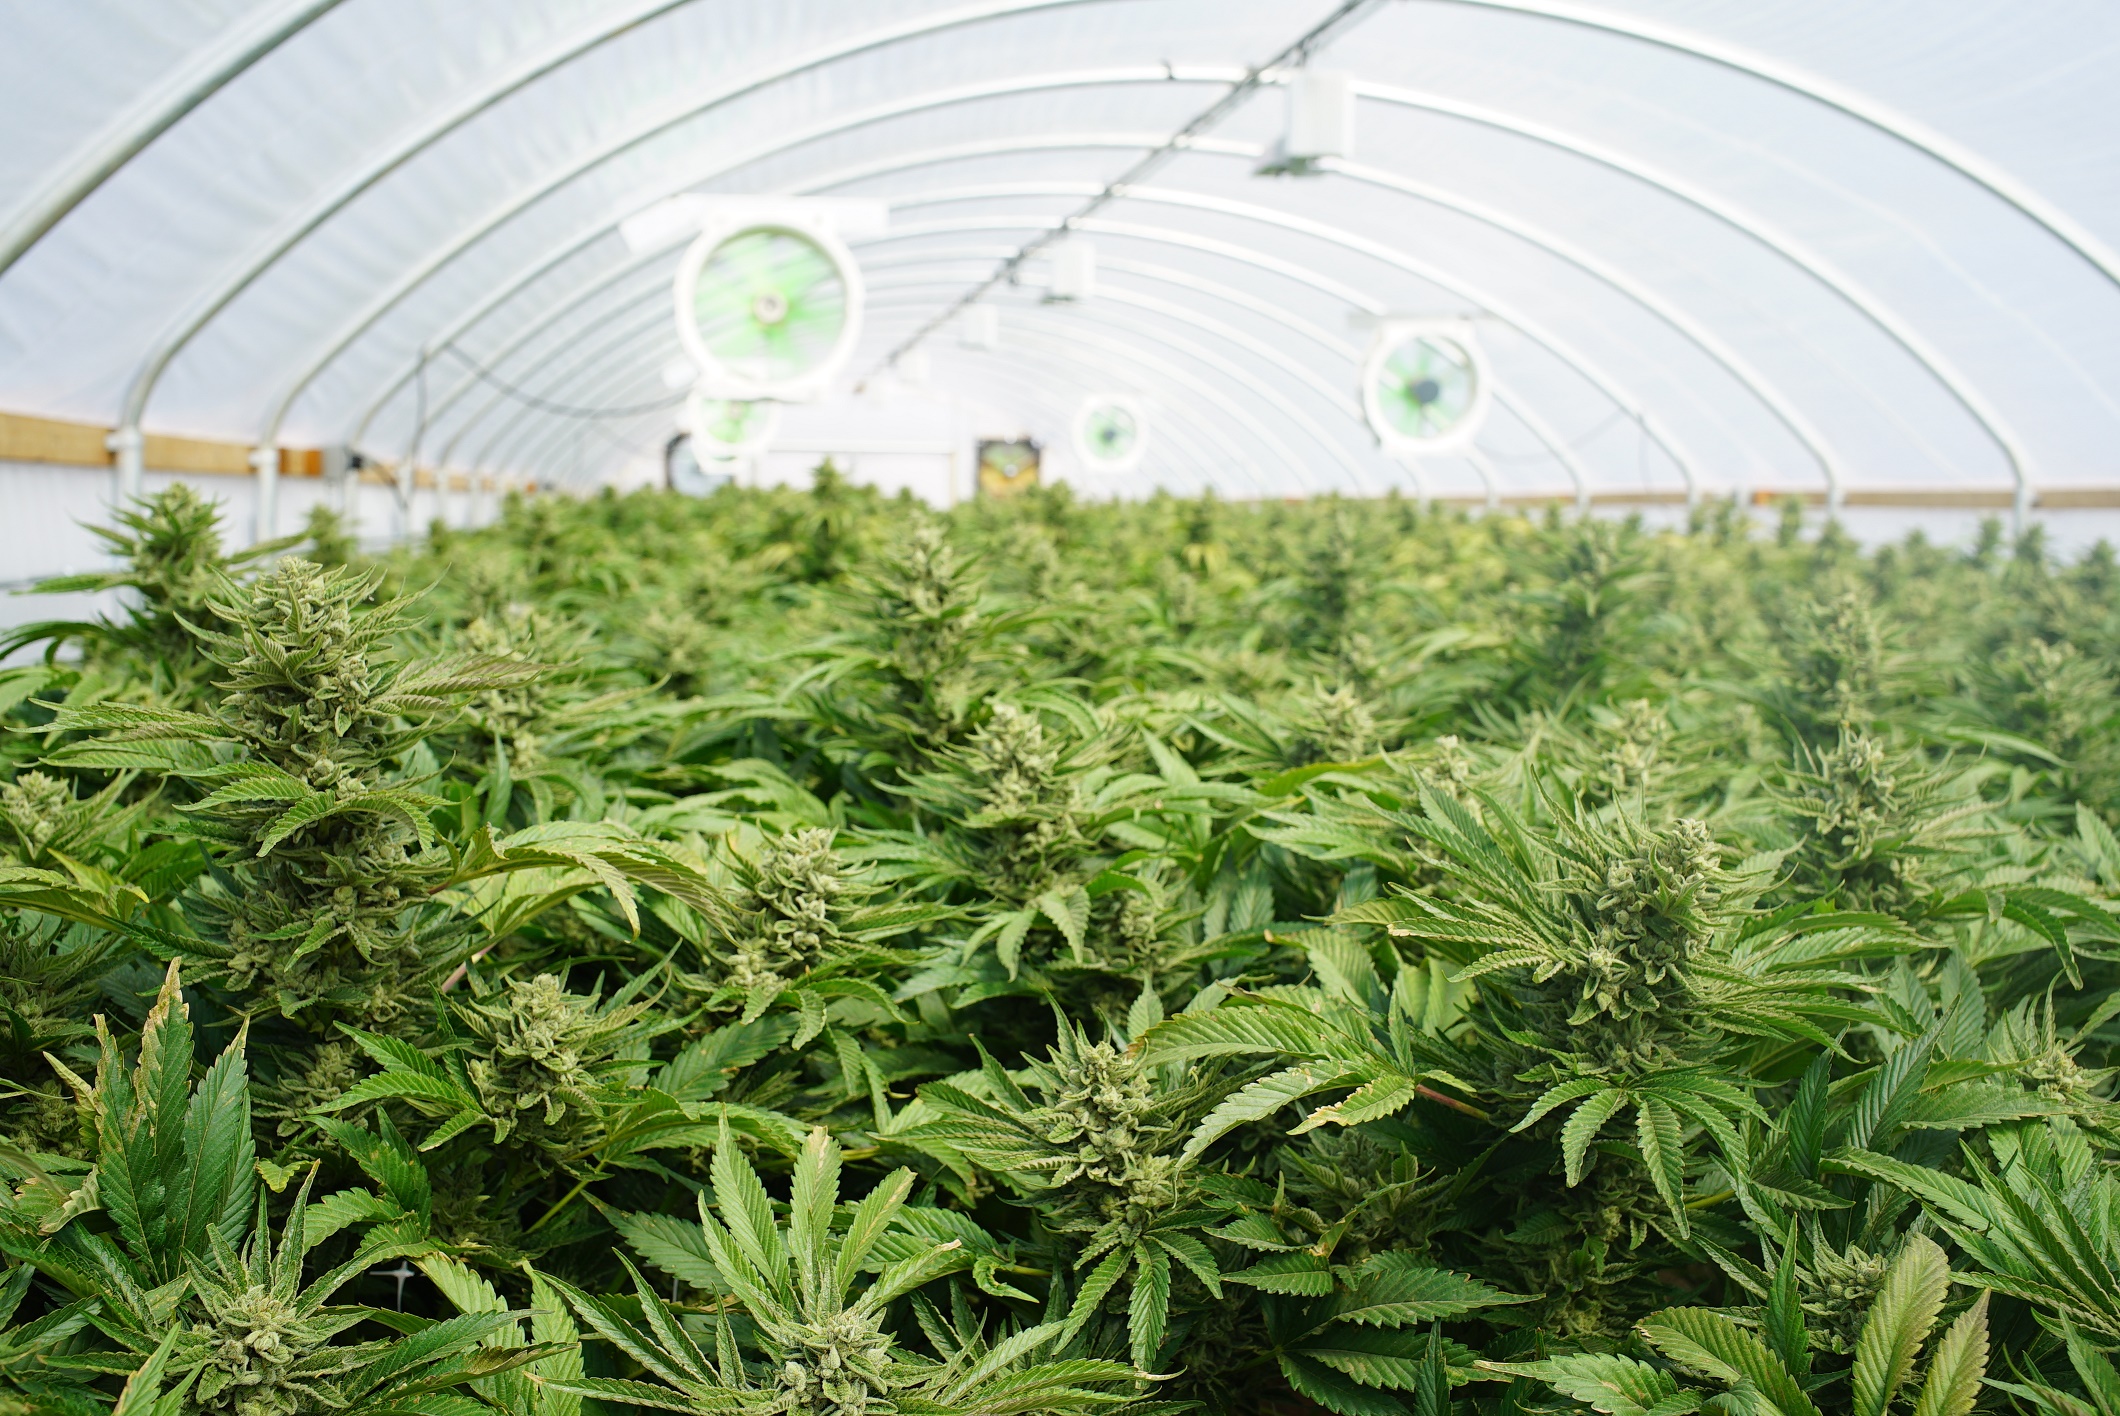 Will Aurora Cannabis Inc. (TSX:ACB) Stock Climb Back to All-Time Highs Next Year?